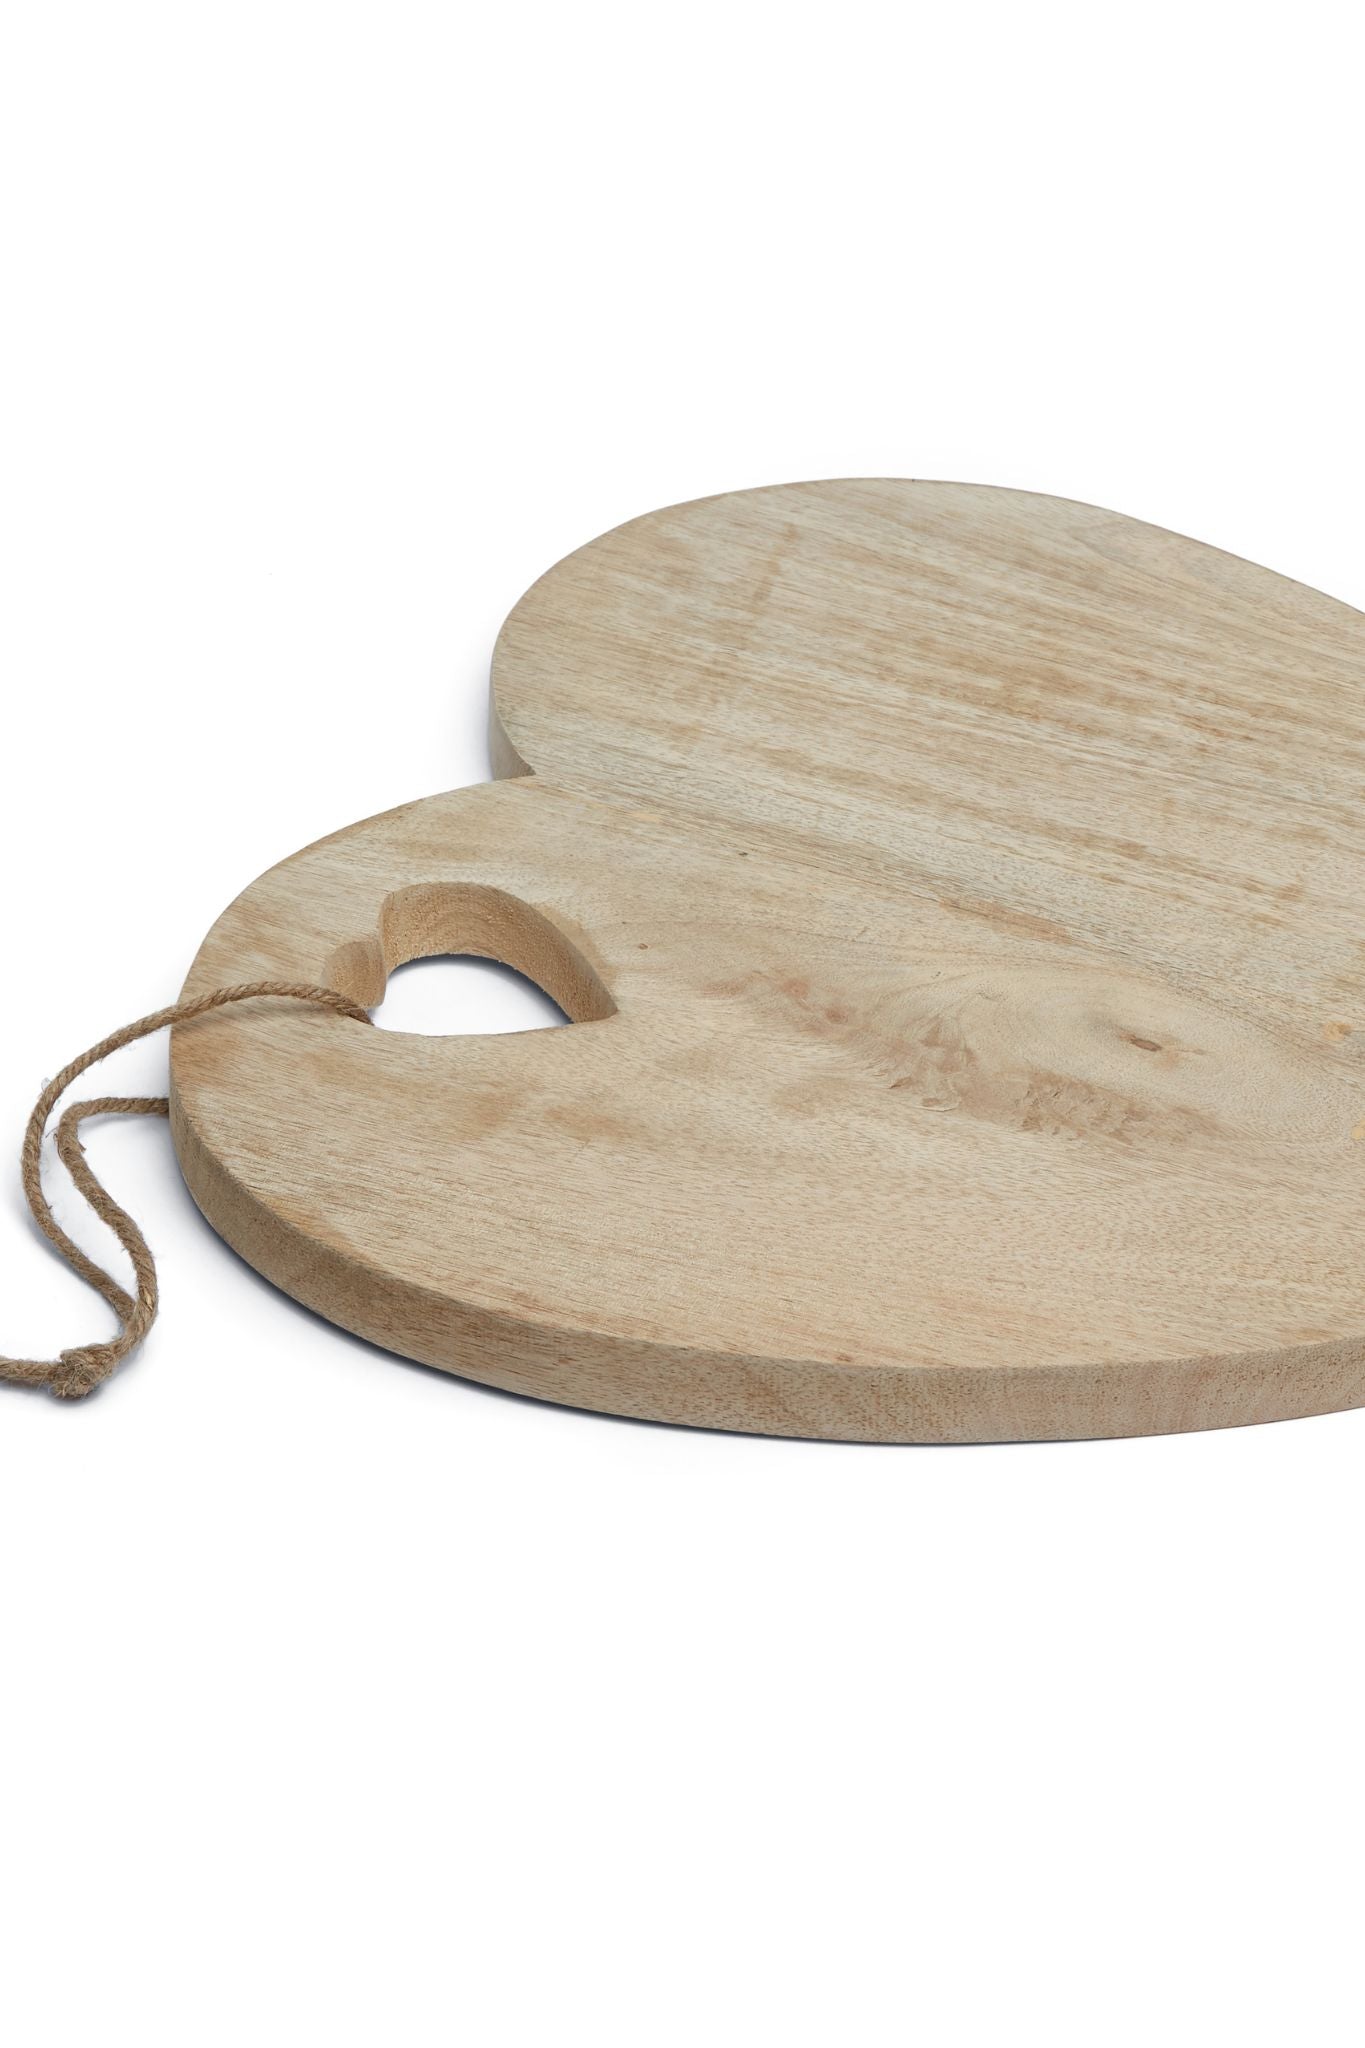 Large Heart Shaped Wooden Chopping Board